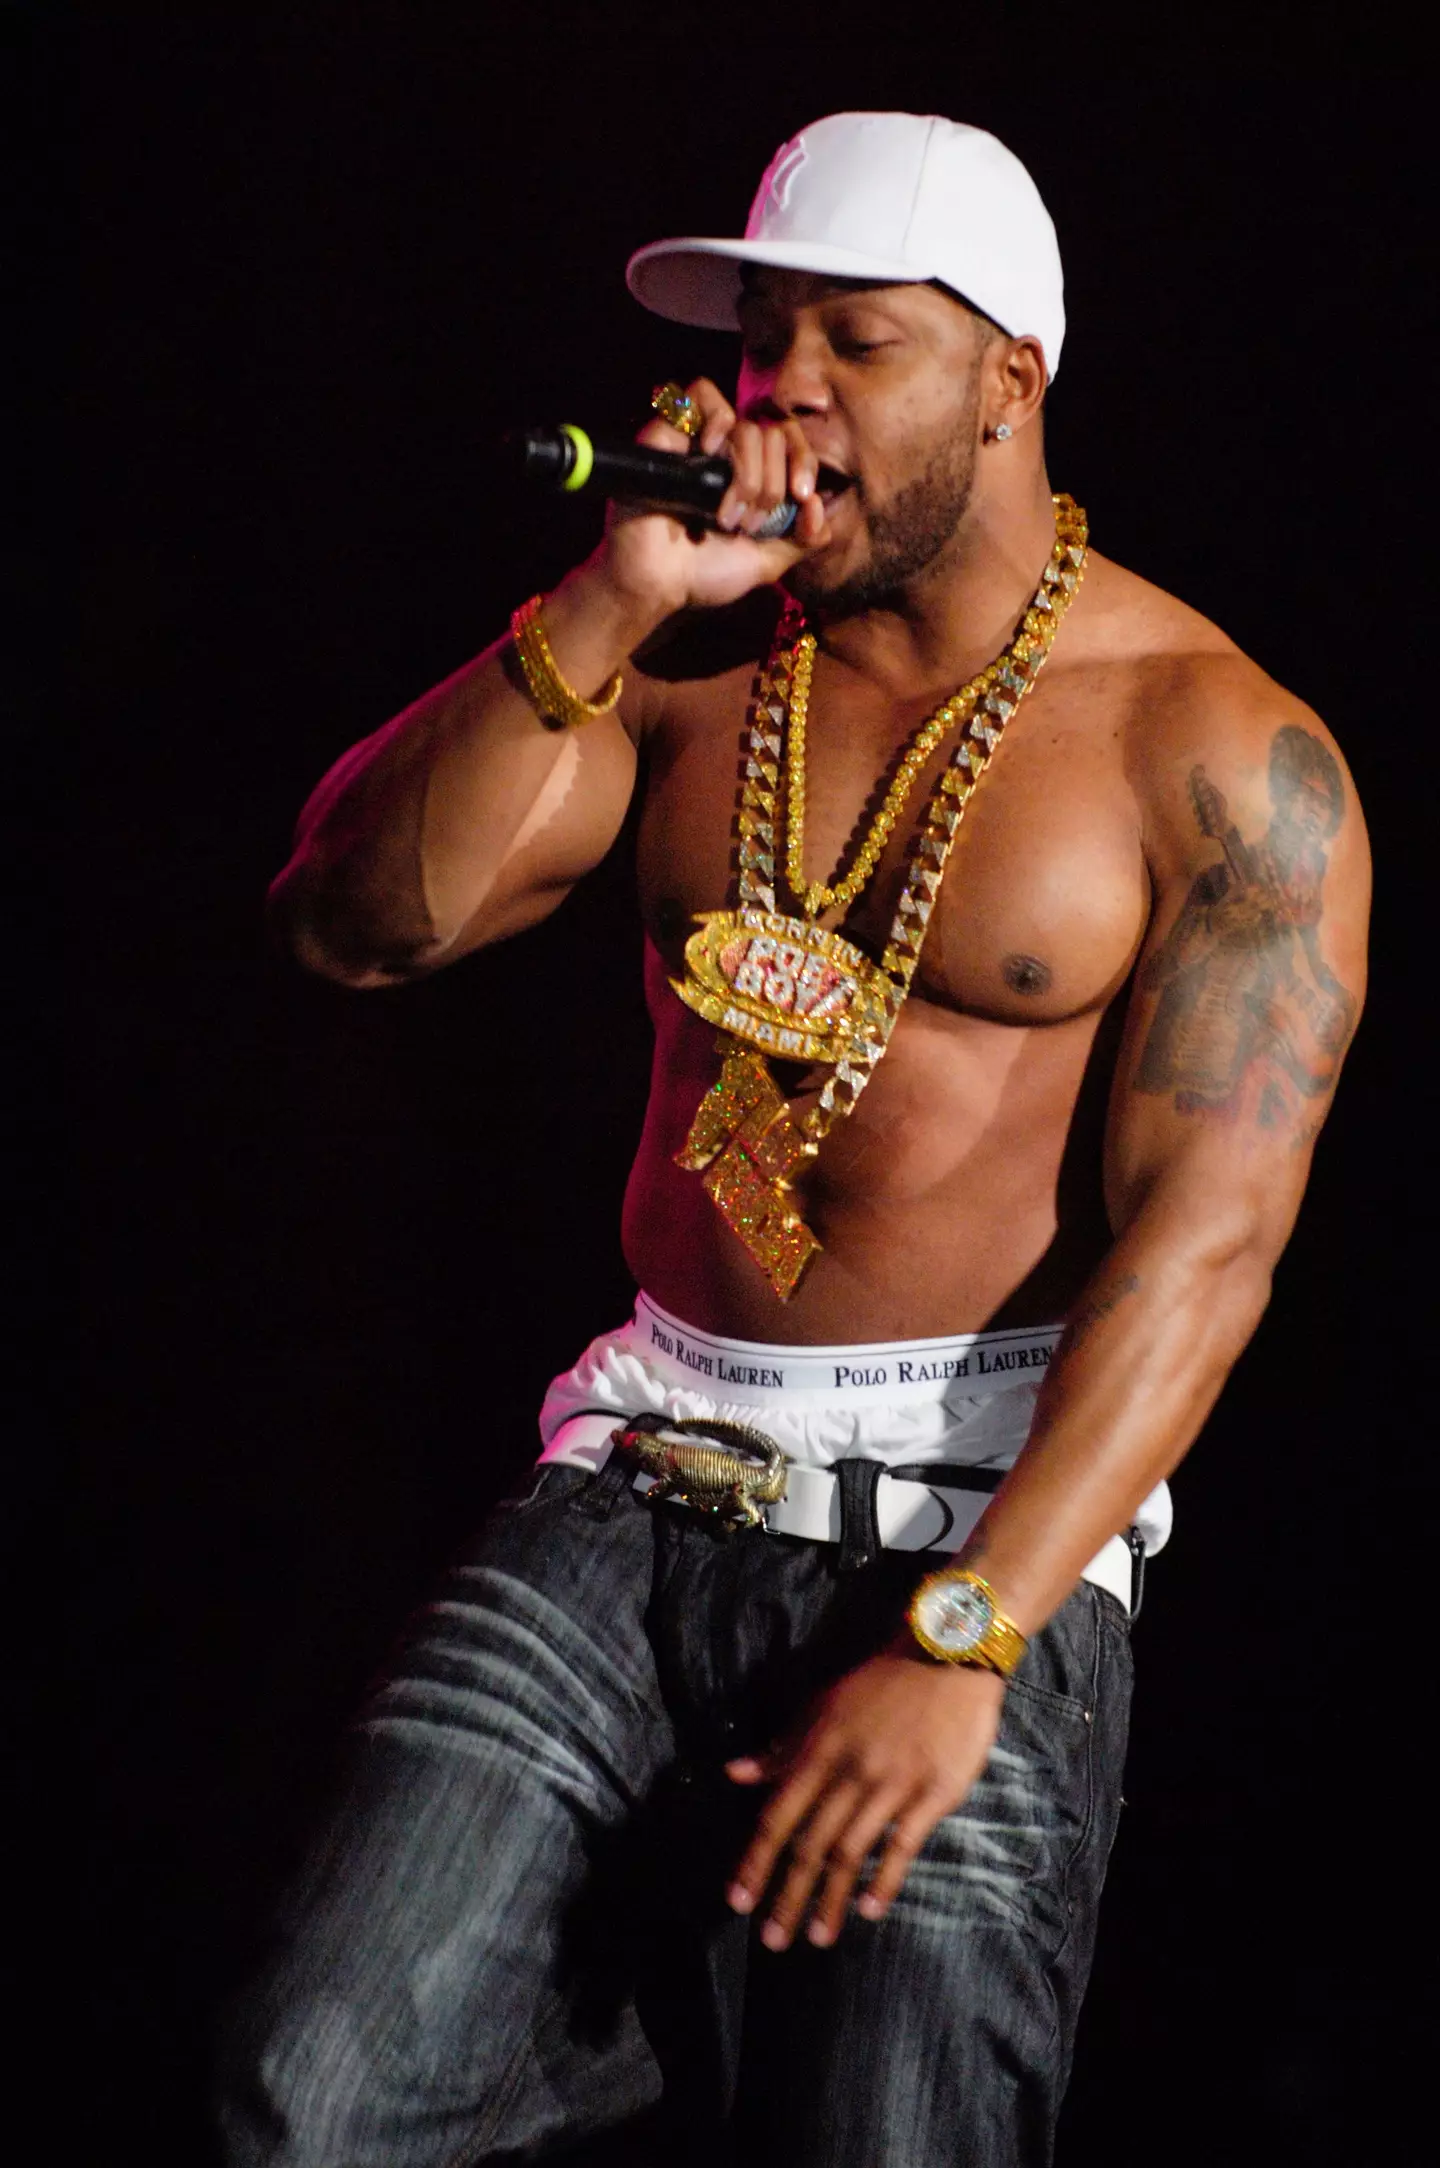 Flo Rida charges a lot for his private appearances.